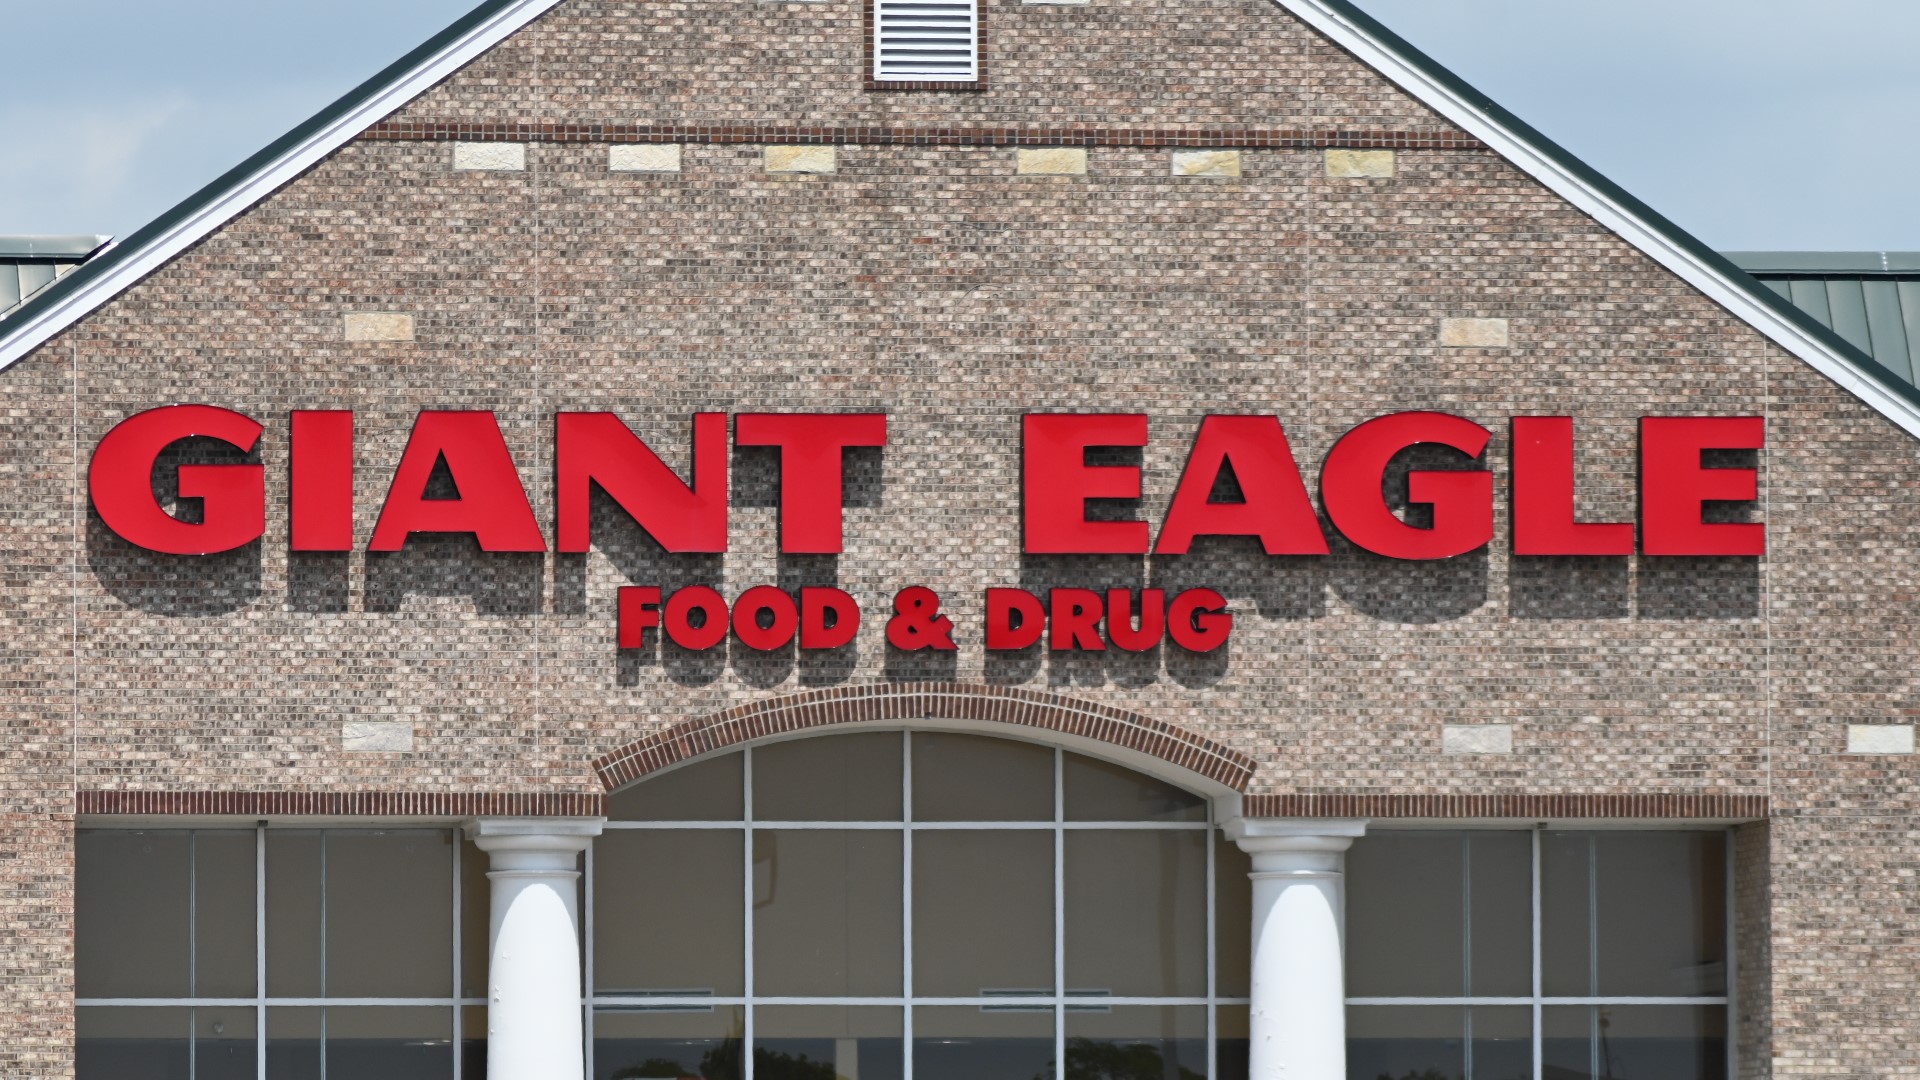 The first tampered PIN pad was found on Nov. 3 at the Giant Eagle located at 4000 West Powell Rd. in Powell.